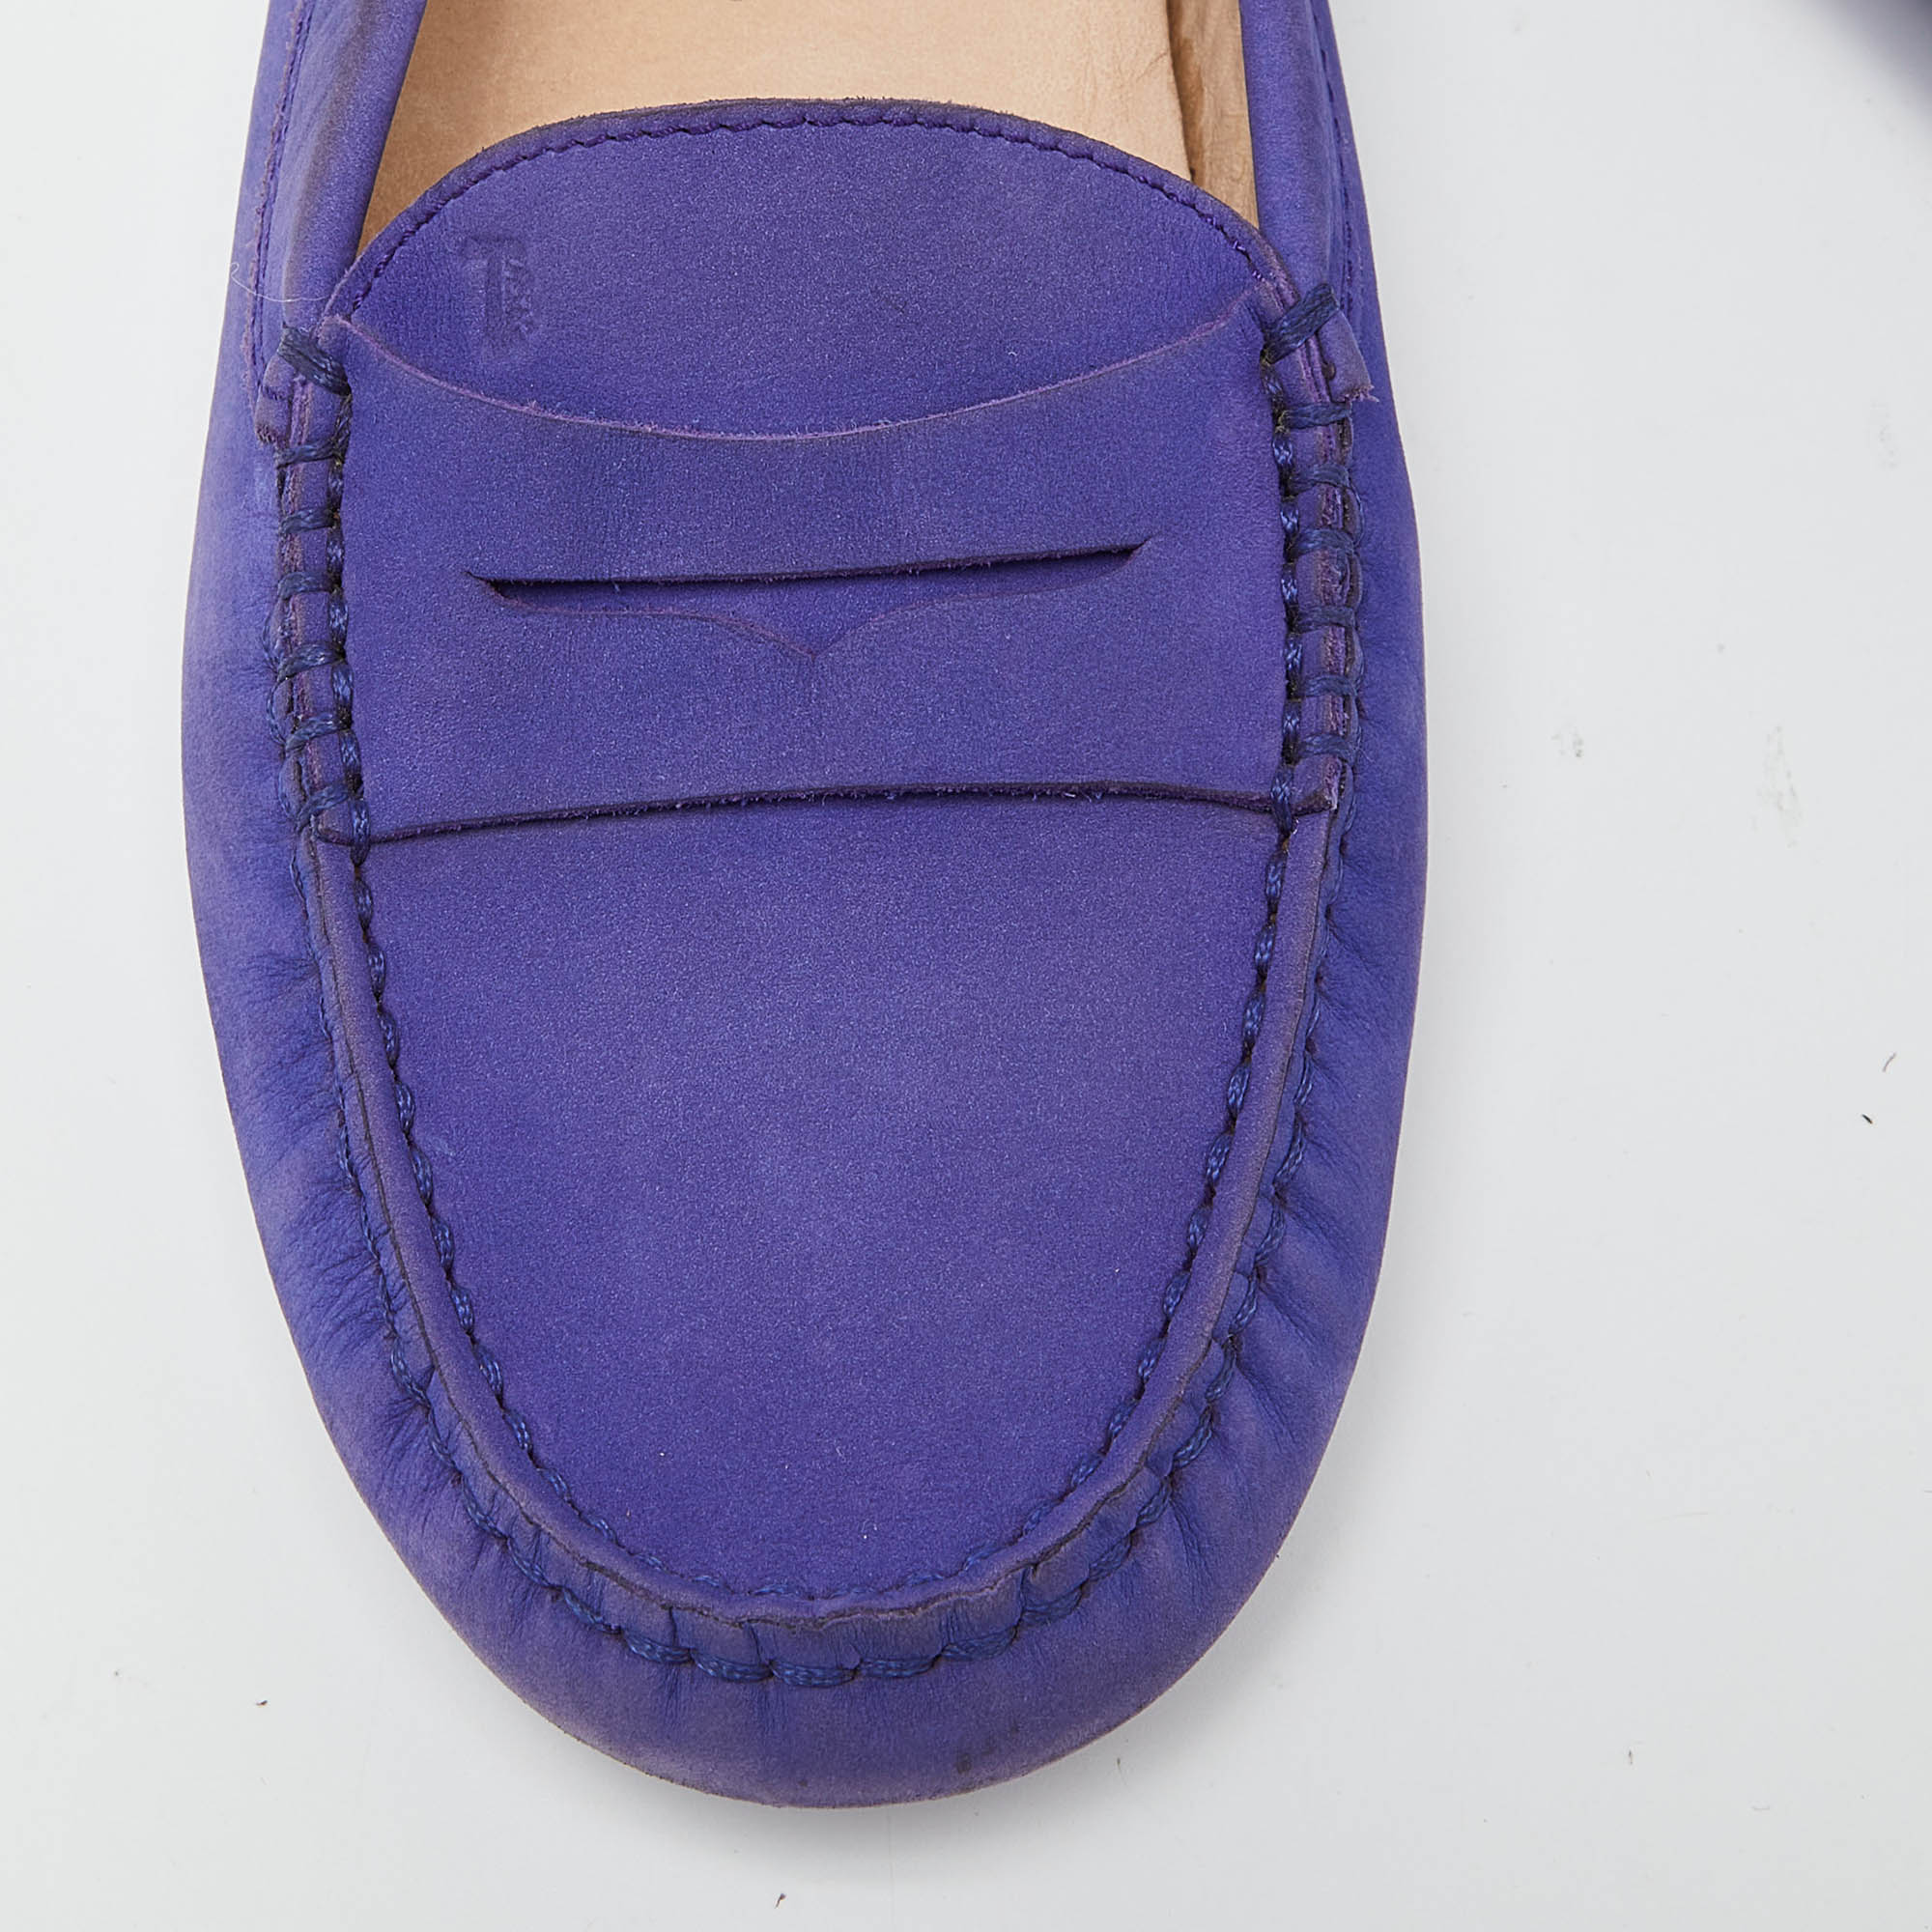 Tod's Purple Suede Penny Slip On Loafers Size 36